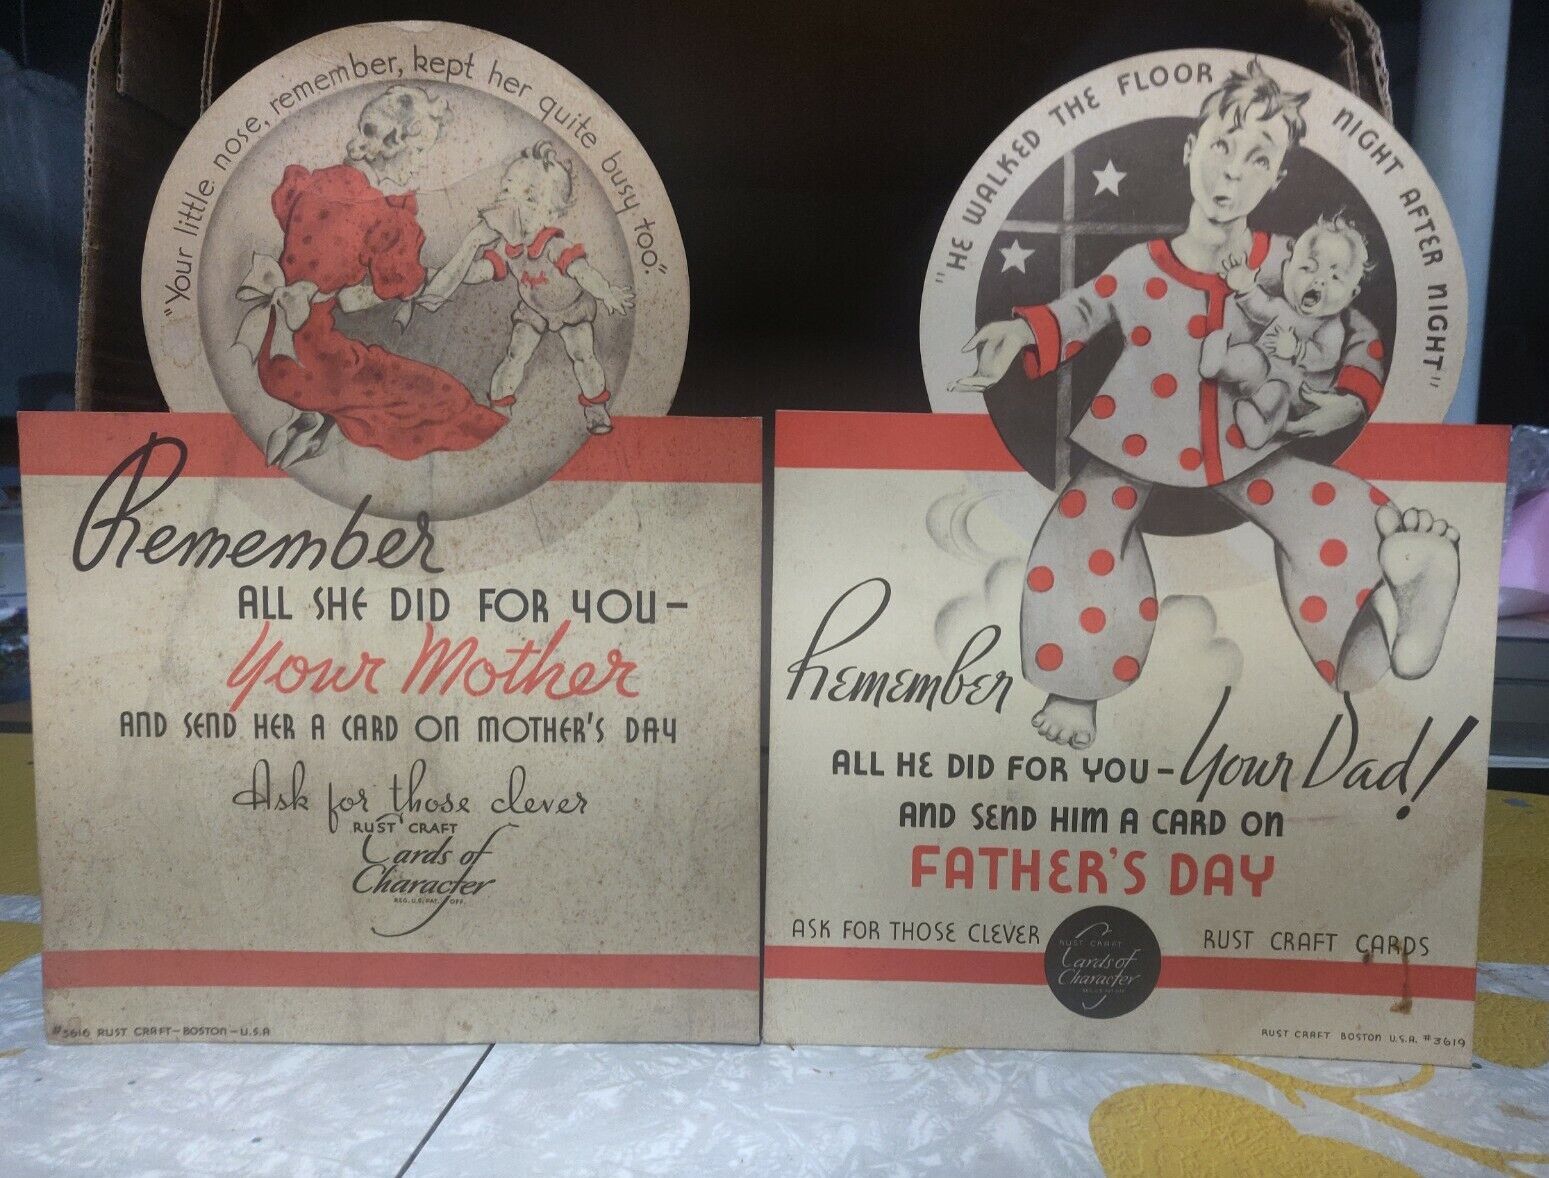 2 VINTAGE RUST CRAFT MOTHERS & FATHERS DAY CARD STORE DISPLAY,WINDOW SIGN 50s